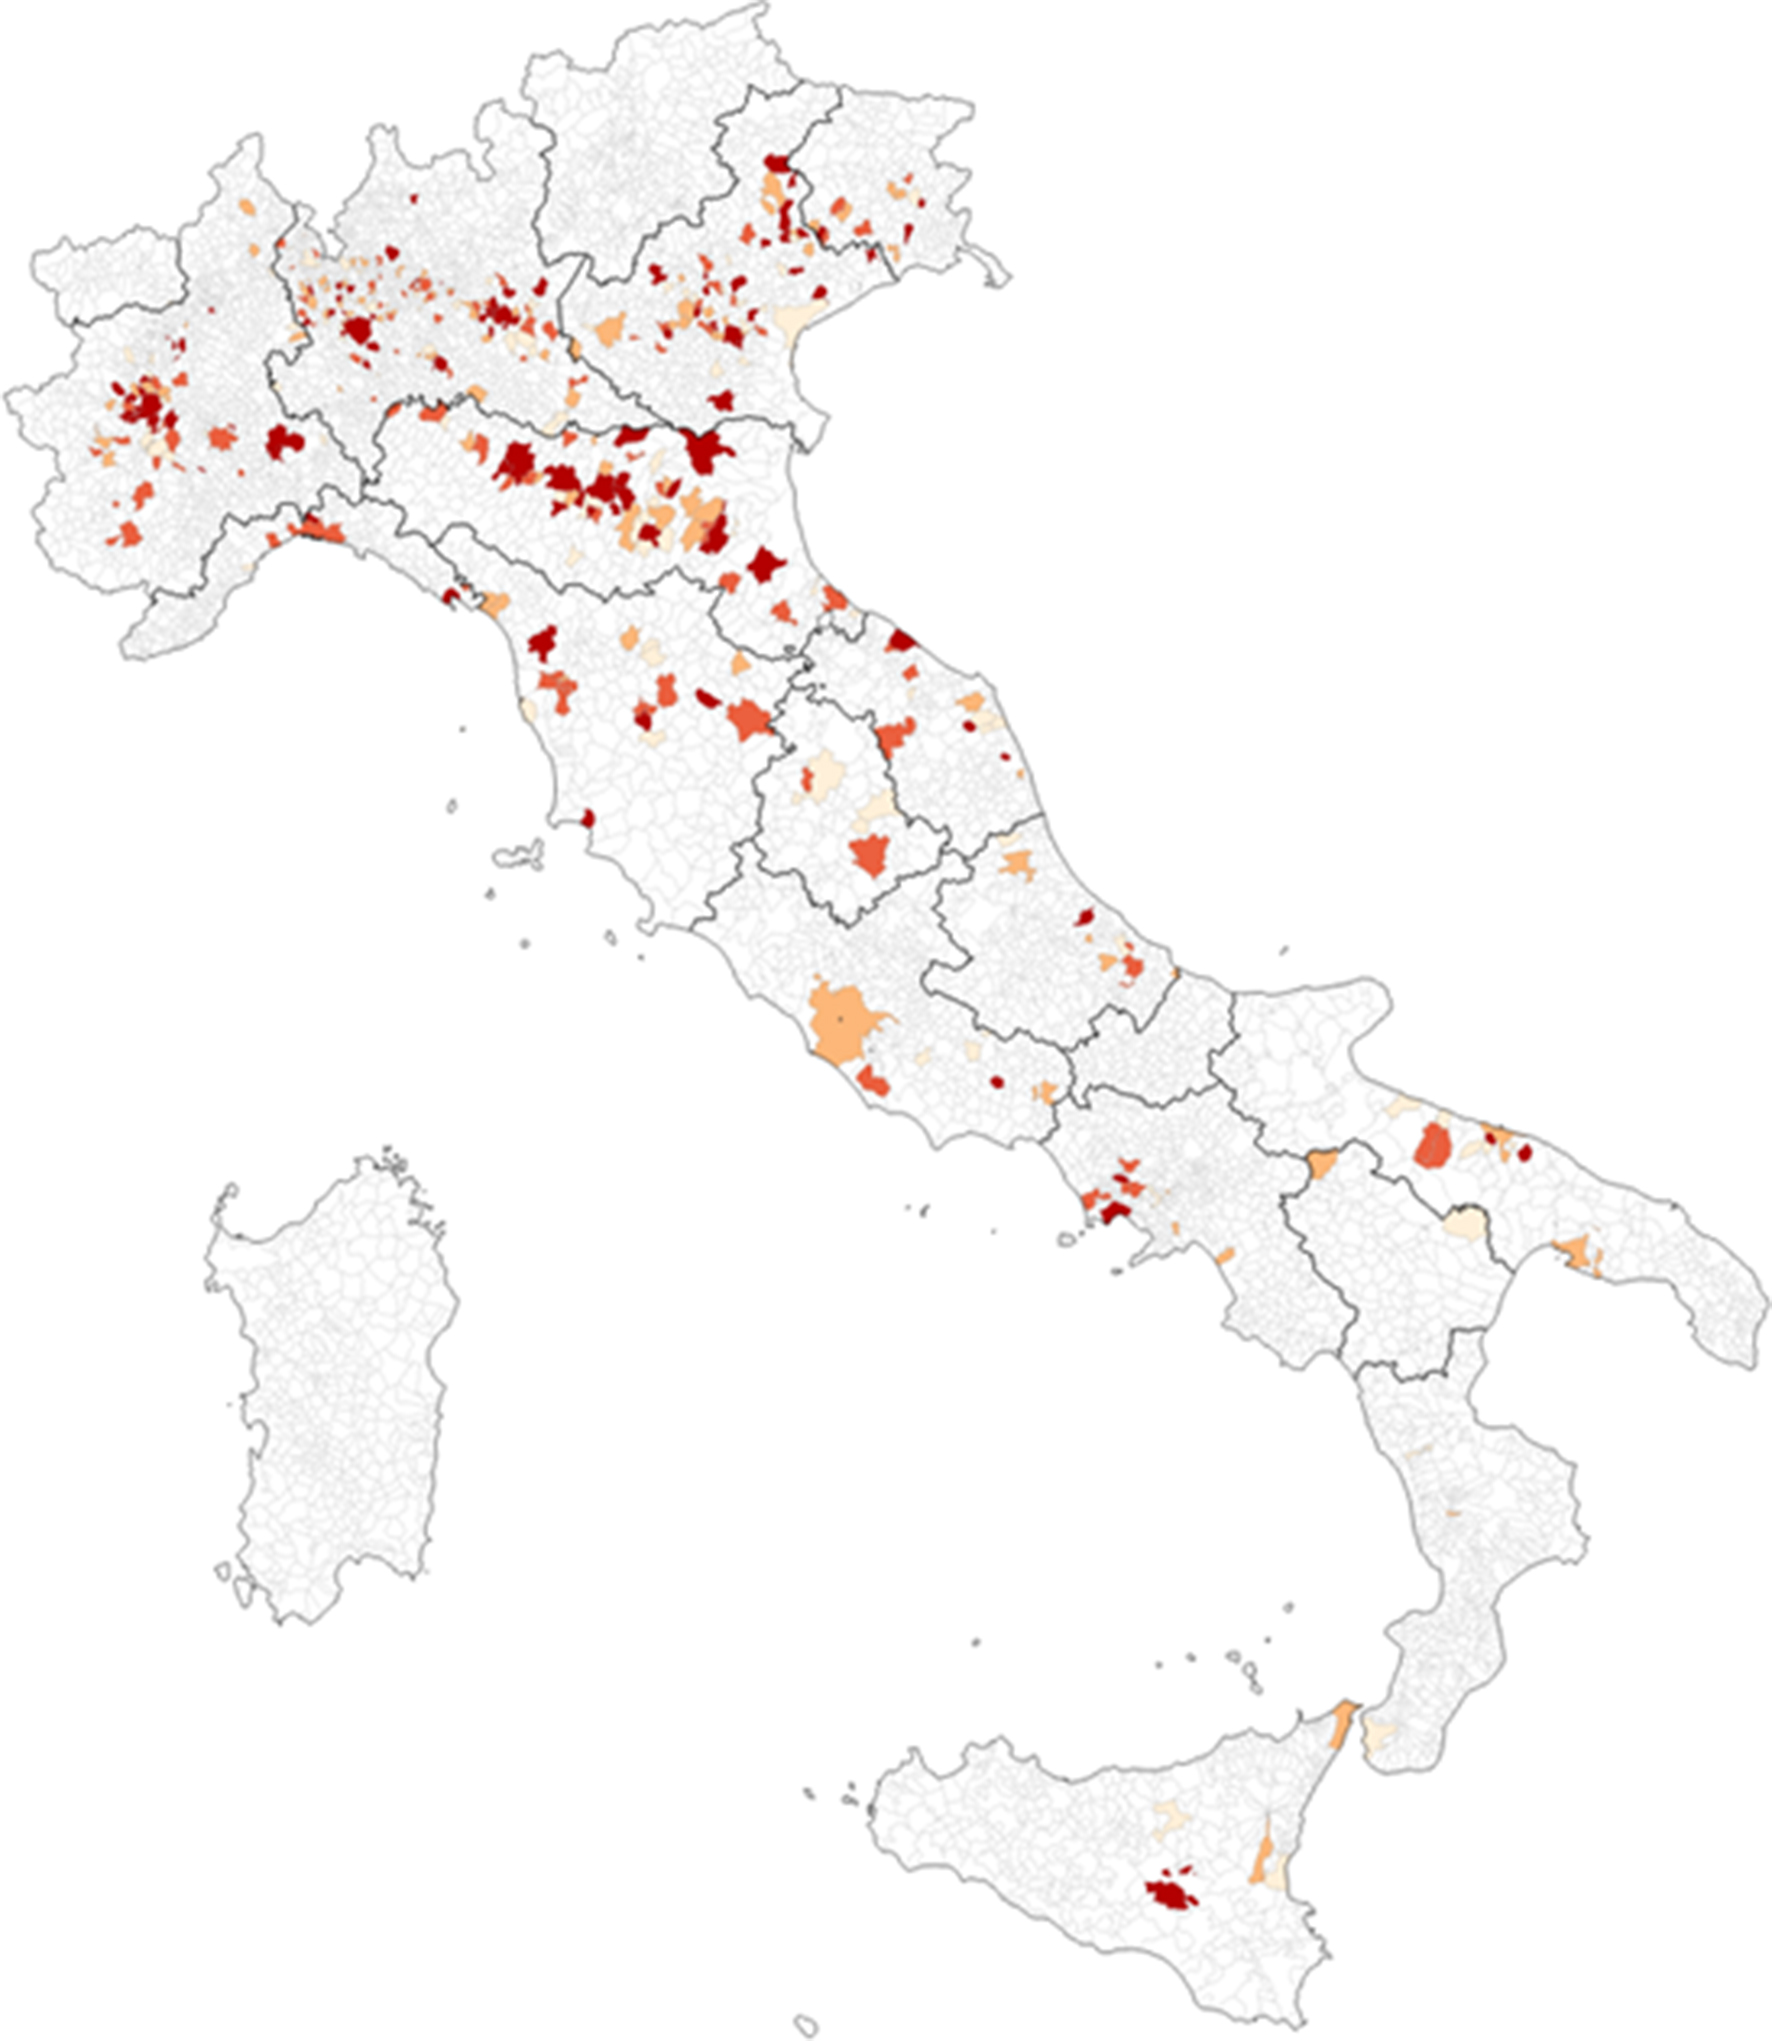 Location of value added of industrial robots’ manufacturing in Italy at the municipality level.